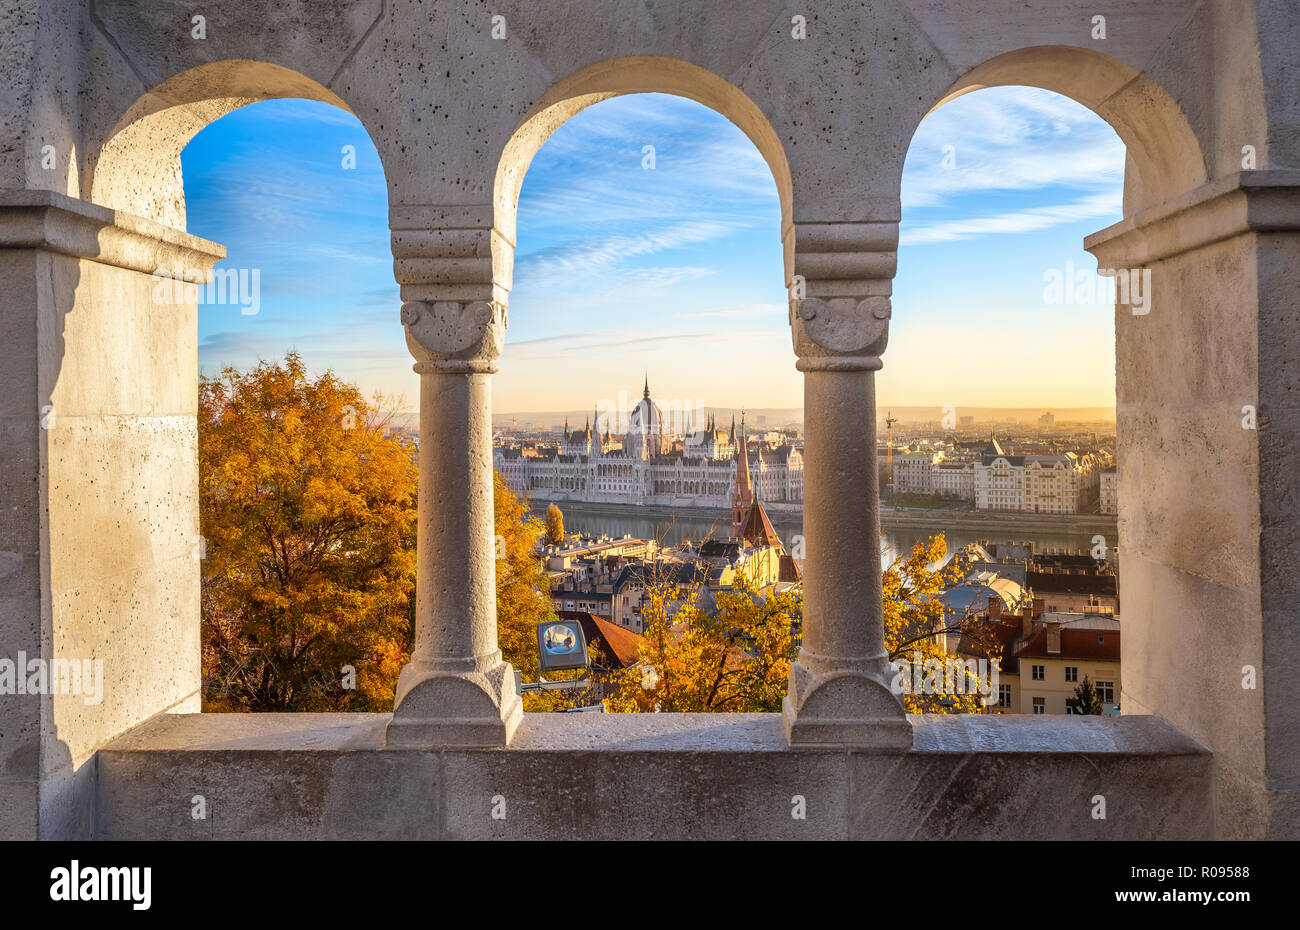 Budapest, Hungary - The beautiful Hungarian Parliament building through old windows of Buda District at sunrise with autumn foliage Stock Photo